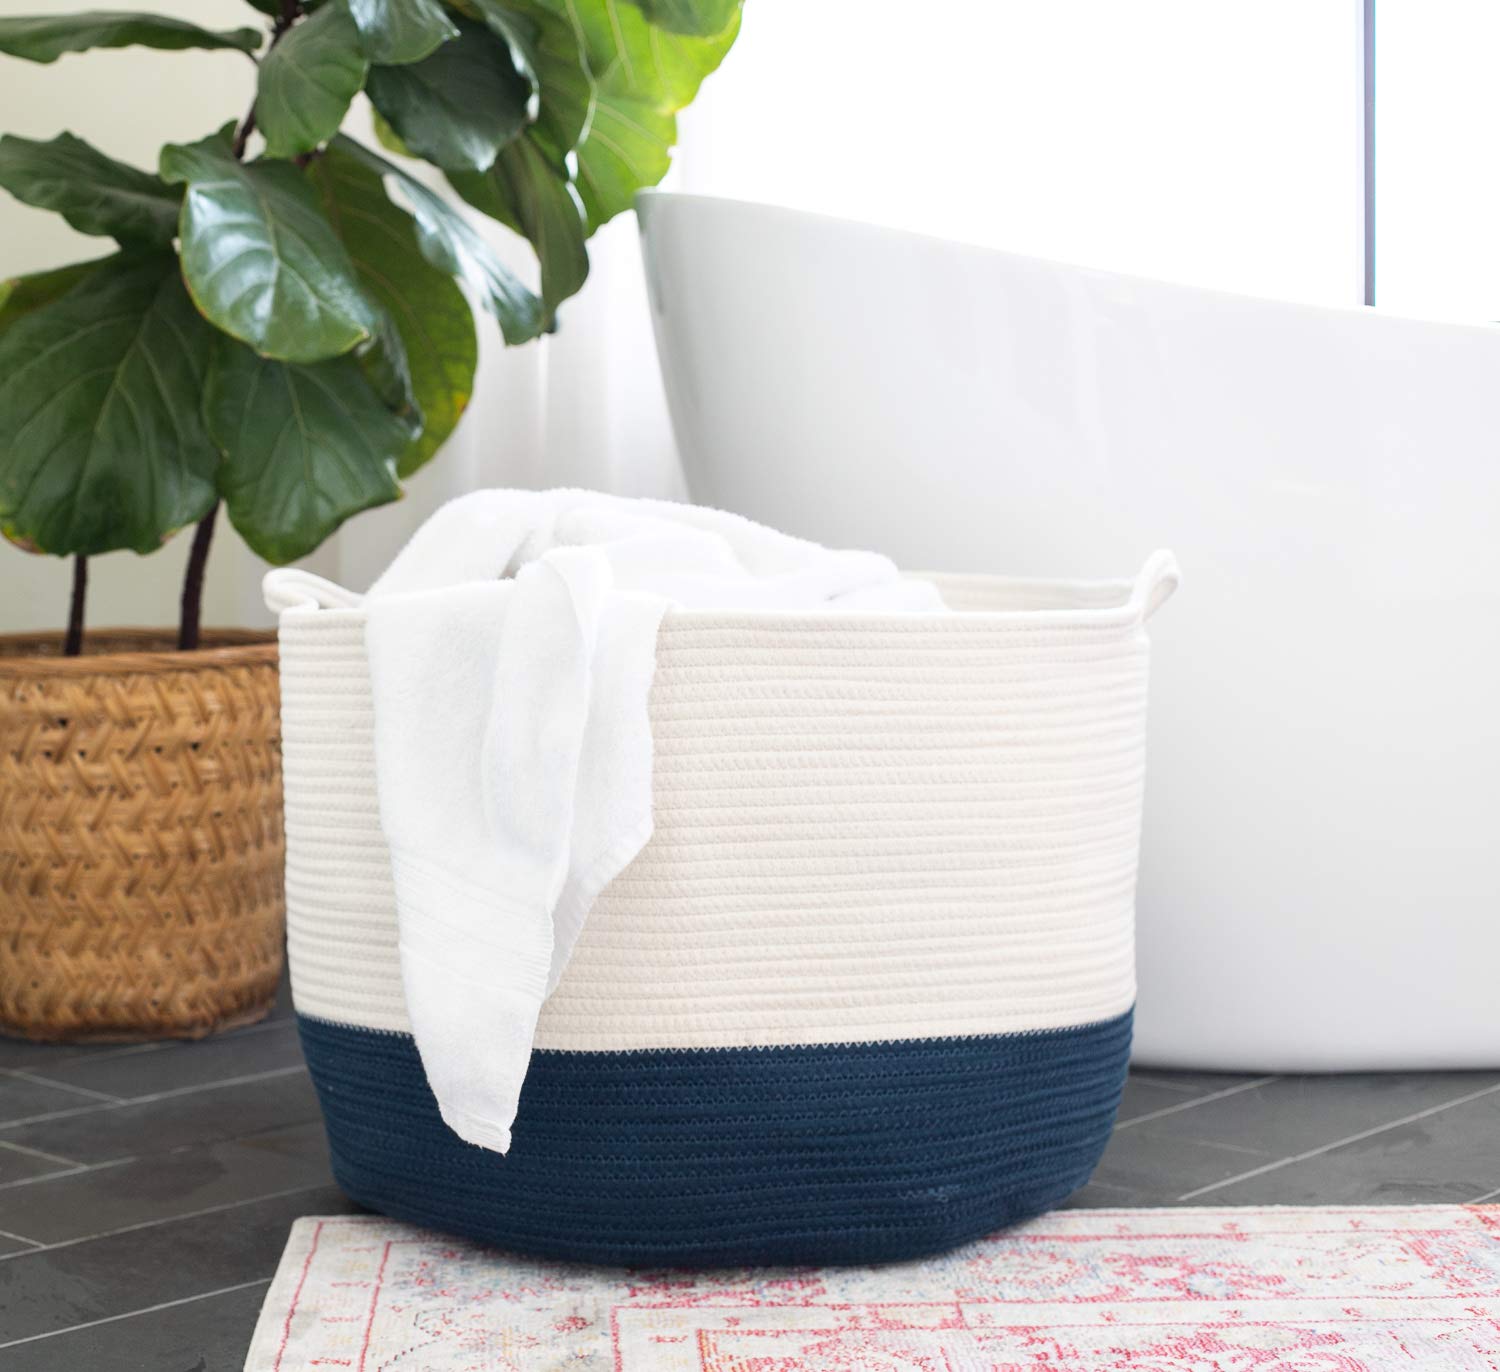 Chloe and Cotton XXXL Extra Large Woven Rope Basket with Handles for Storage - 15" H x 21.5" D - Navy White - image 4 of 5